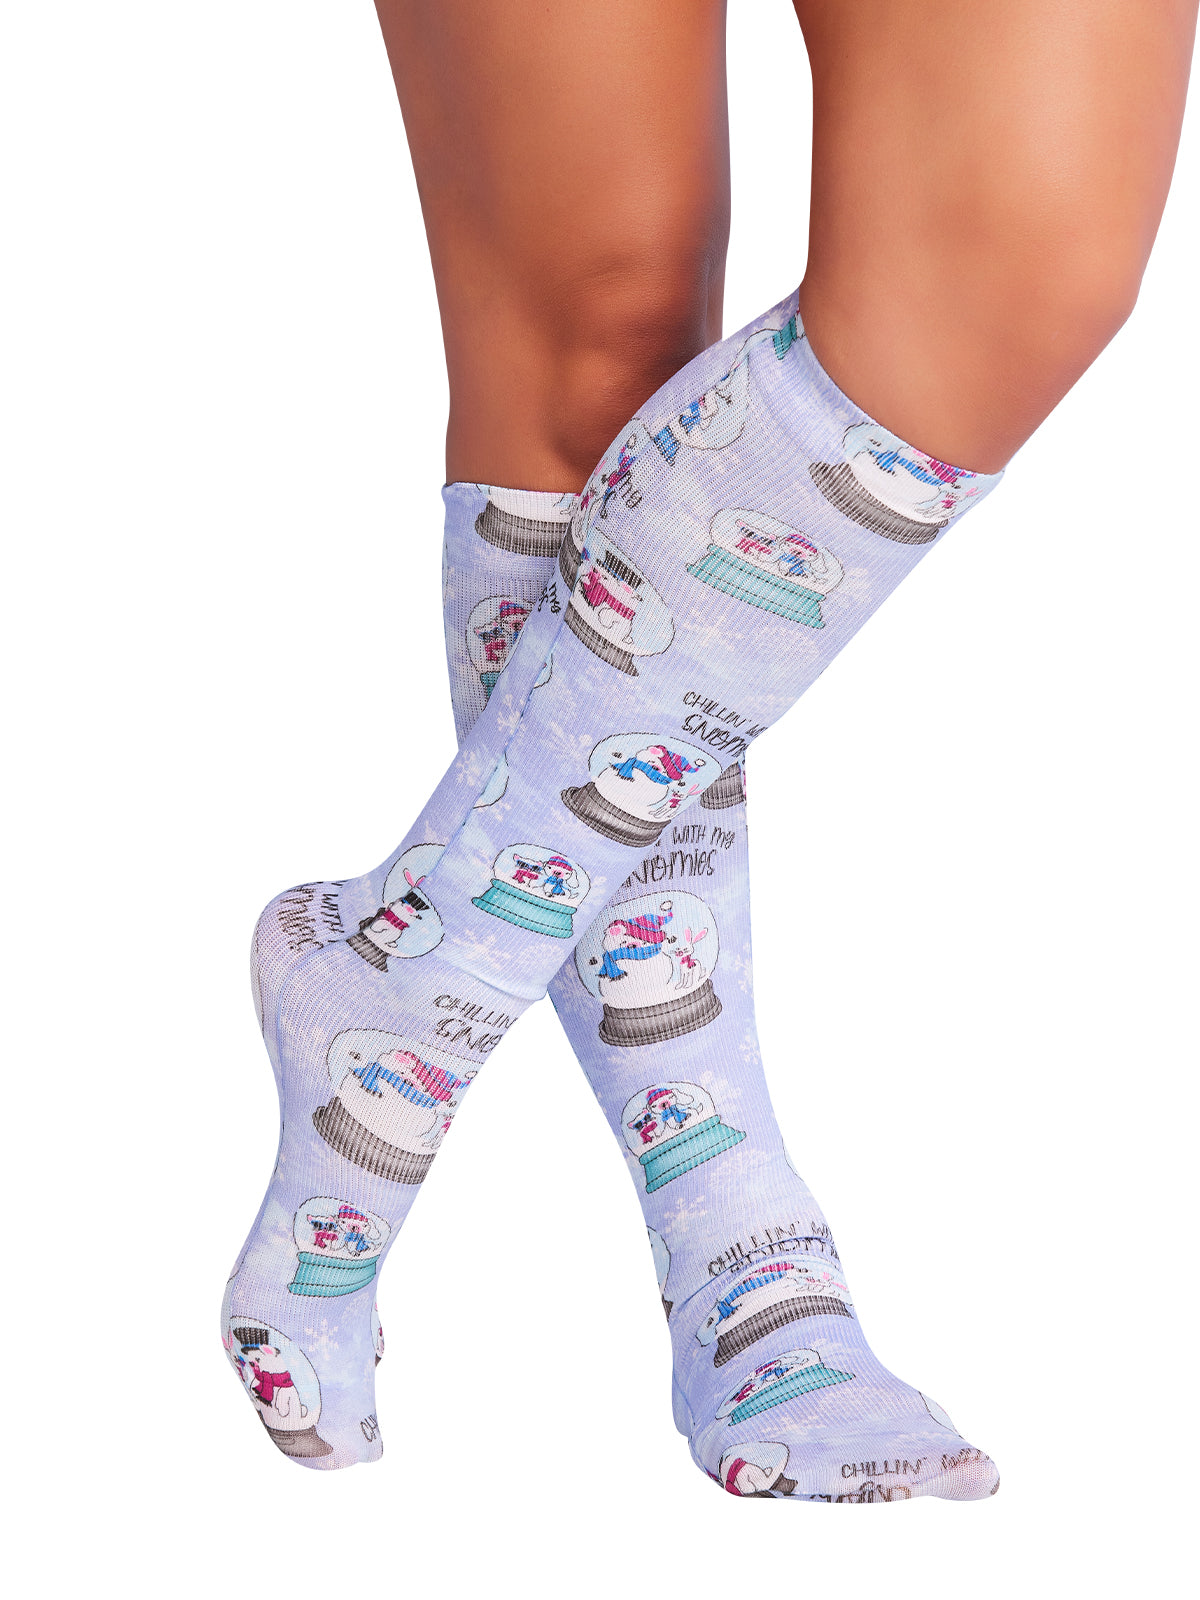 Women's Knee High 8-15 mmHg Compression Sock - COMFORTSUPPORT - Chillin' Snowmies